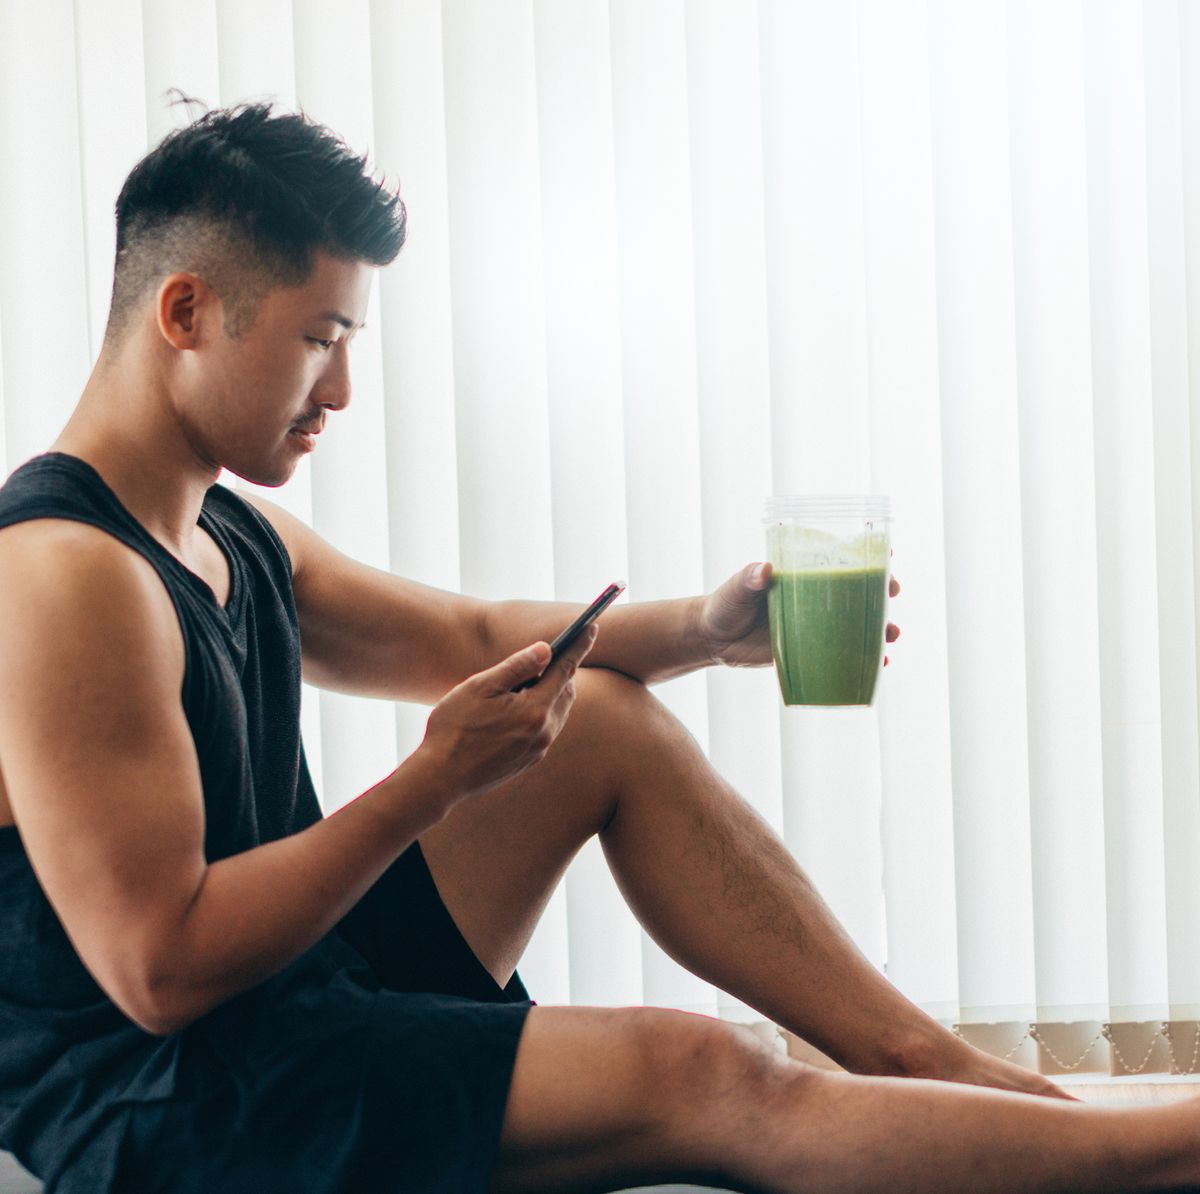 What actually works for muscle recovery—and what doesn't